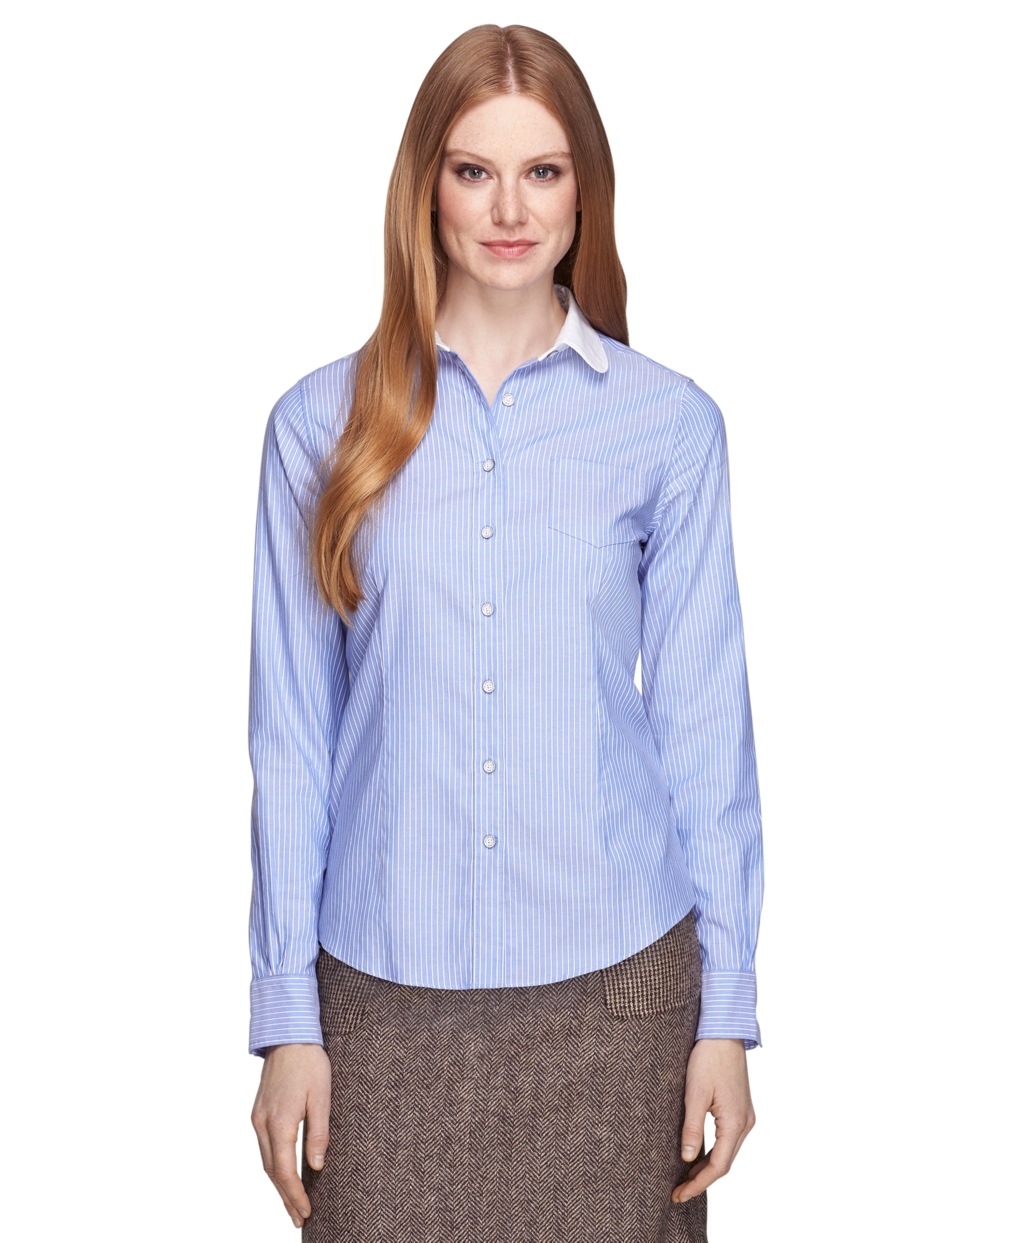 Lyst - Brooks Brothers Cotton Oxford Stripe Shirt in Blue